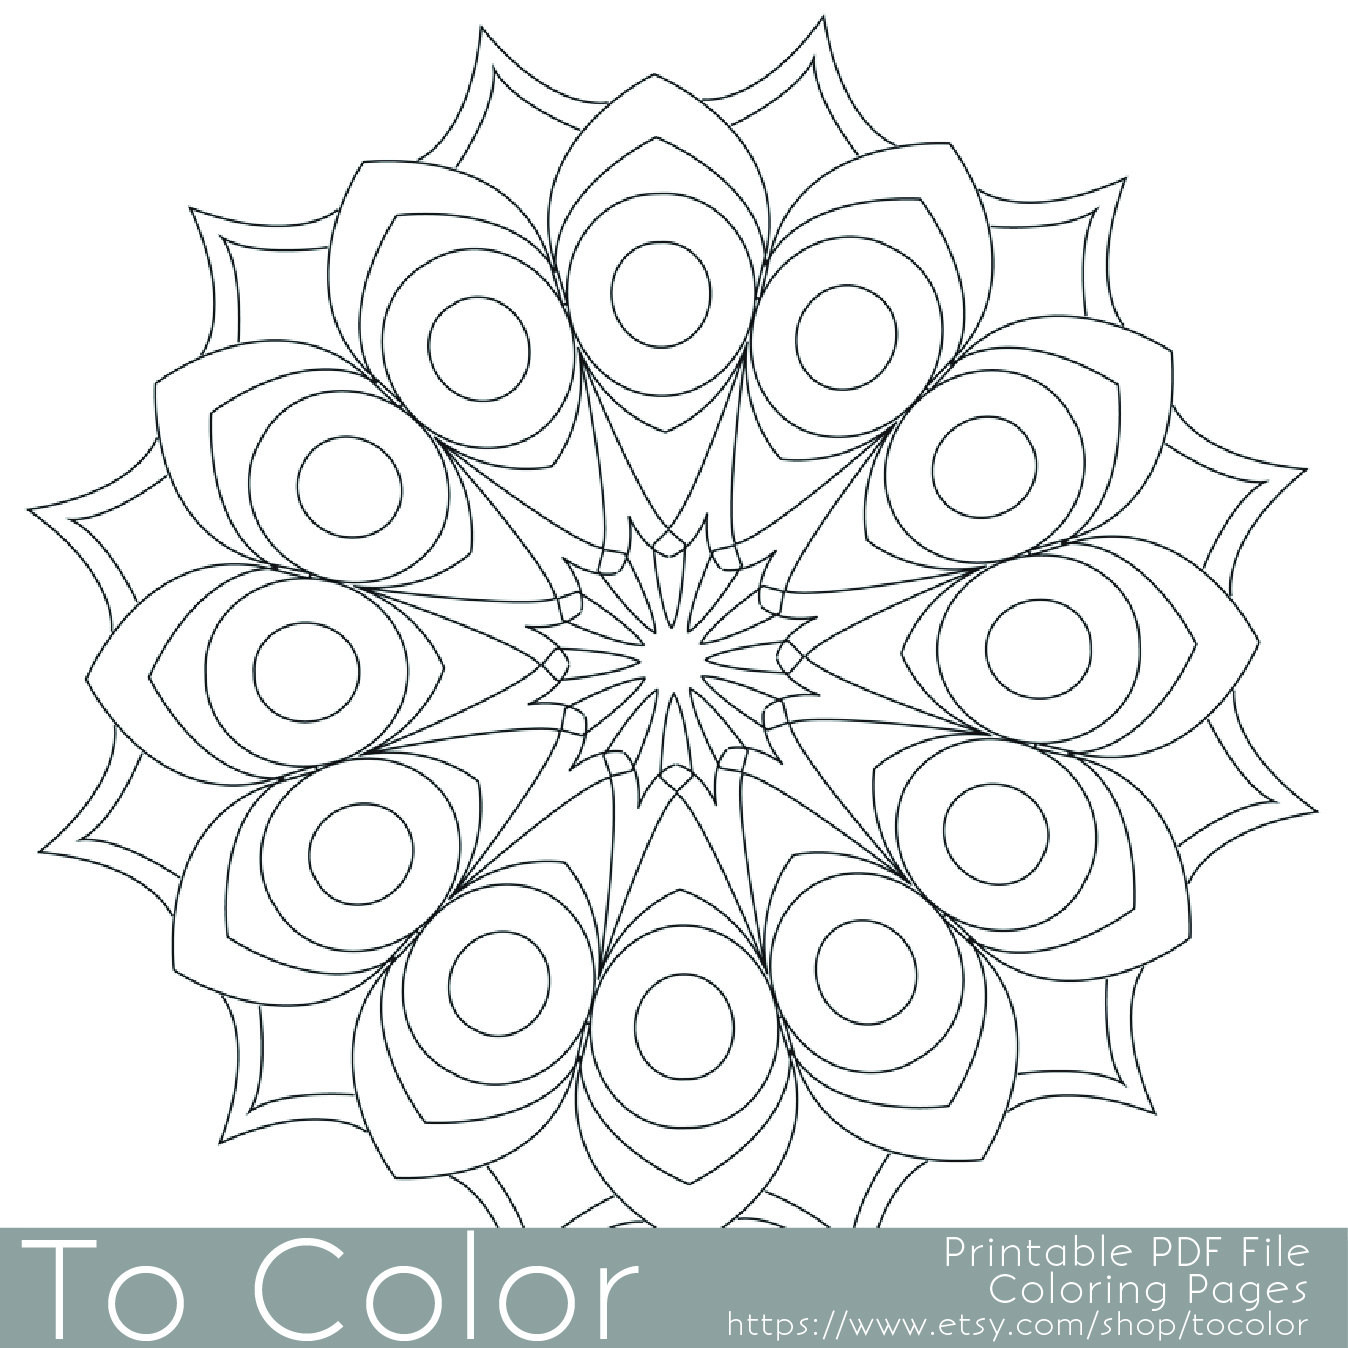 Easy Adult Coloring Pages
 Printable Circular Mandala Easy Coloring Pages for Adults Big